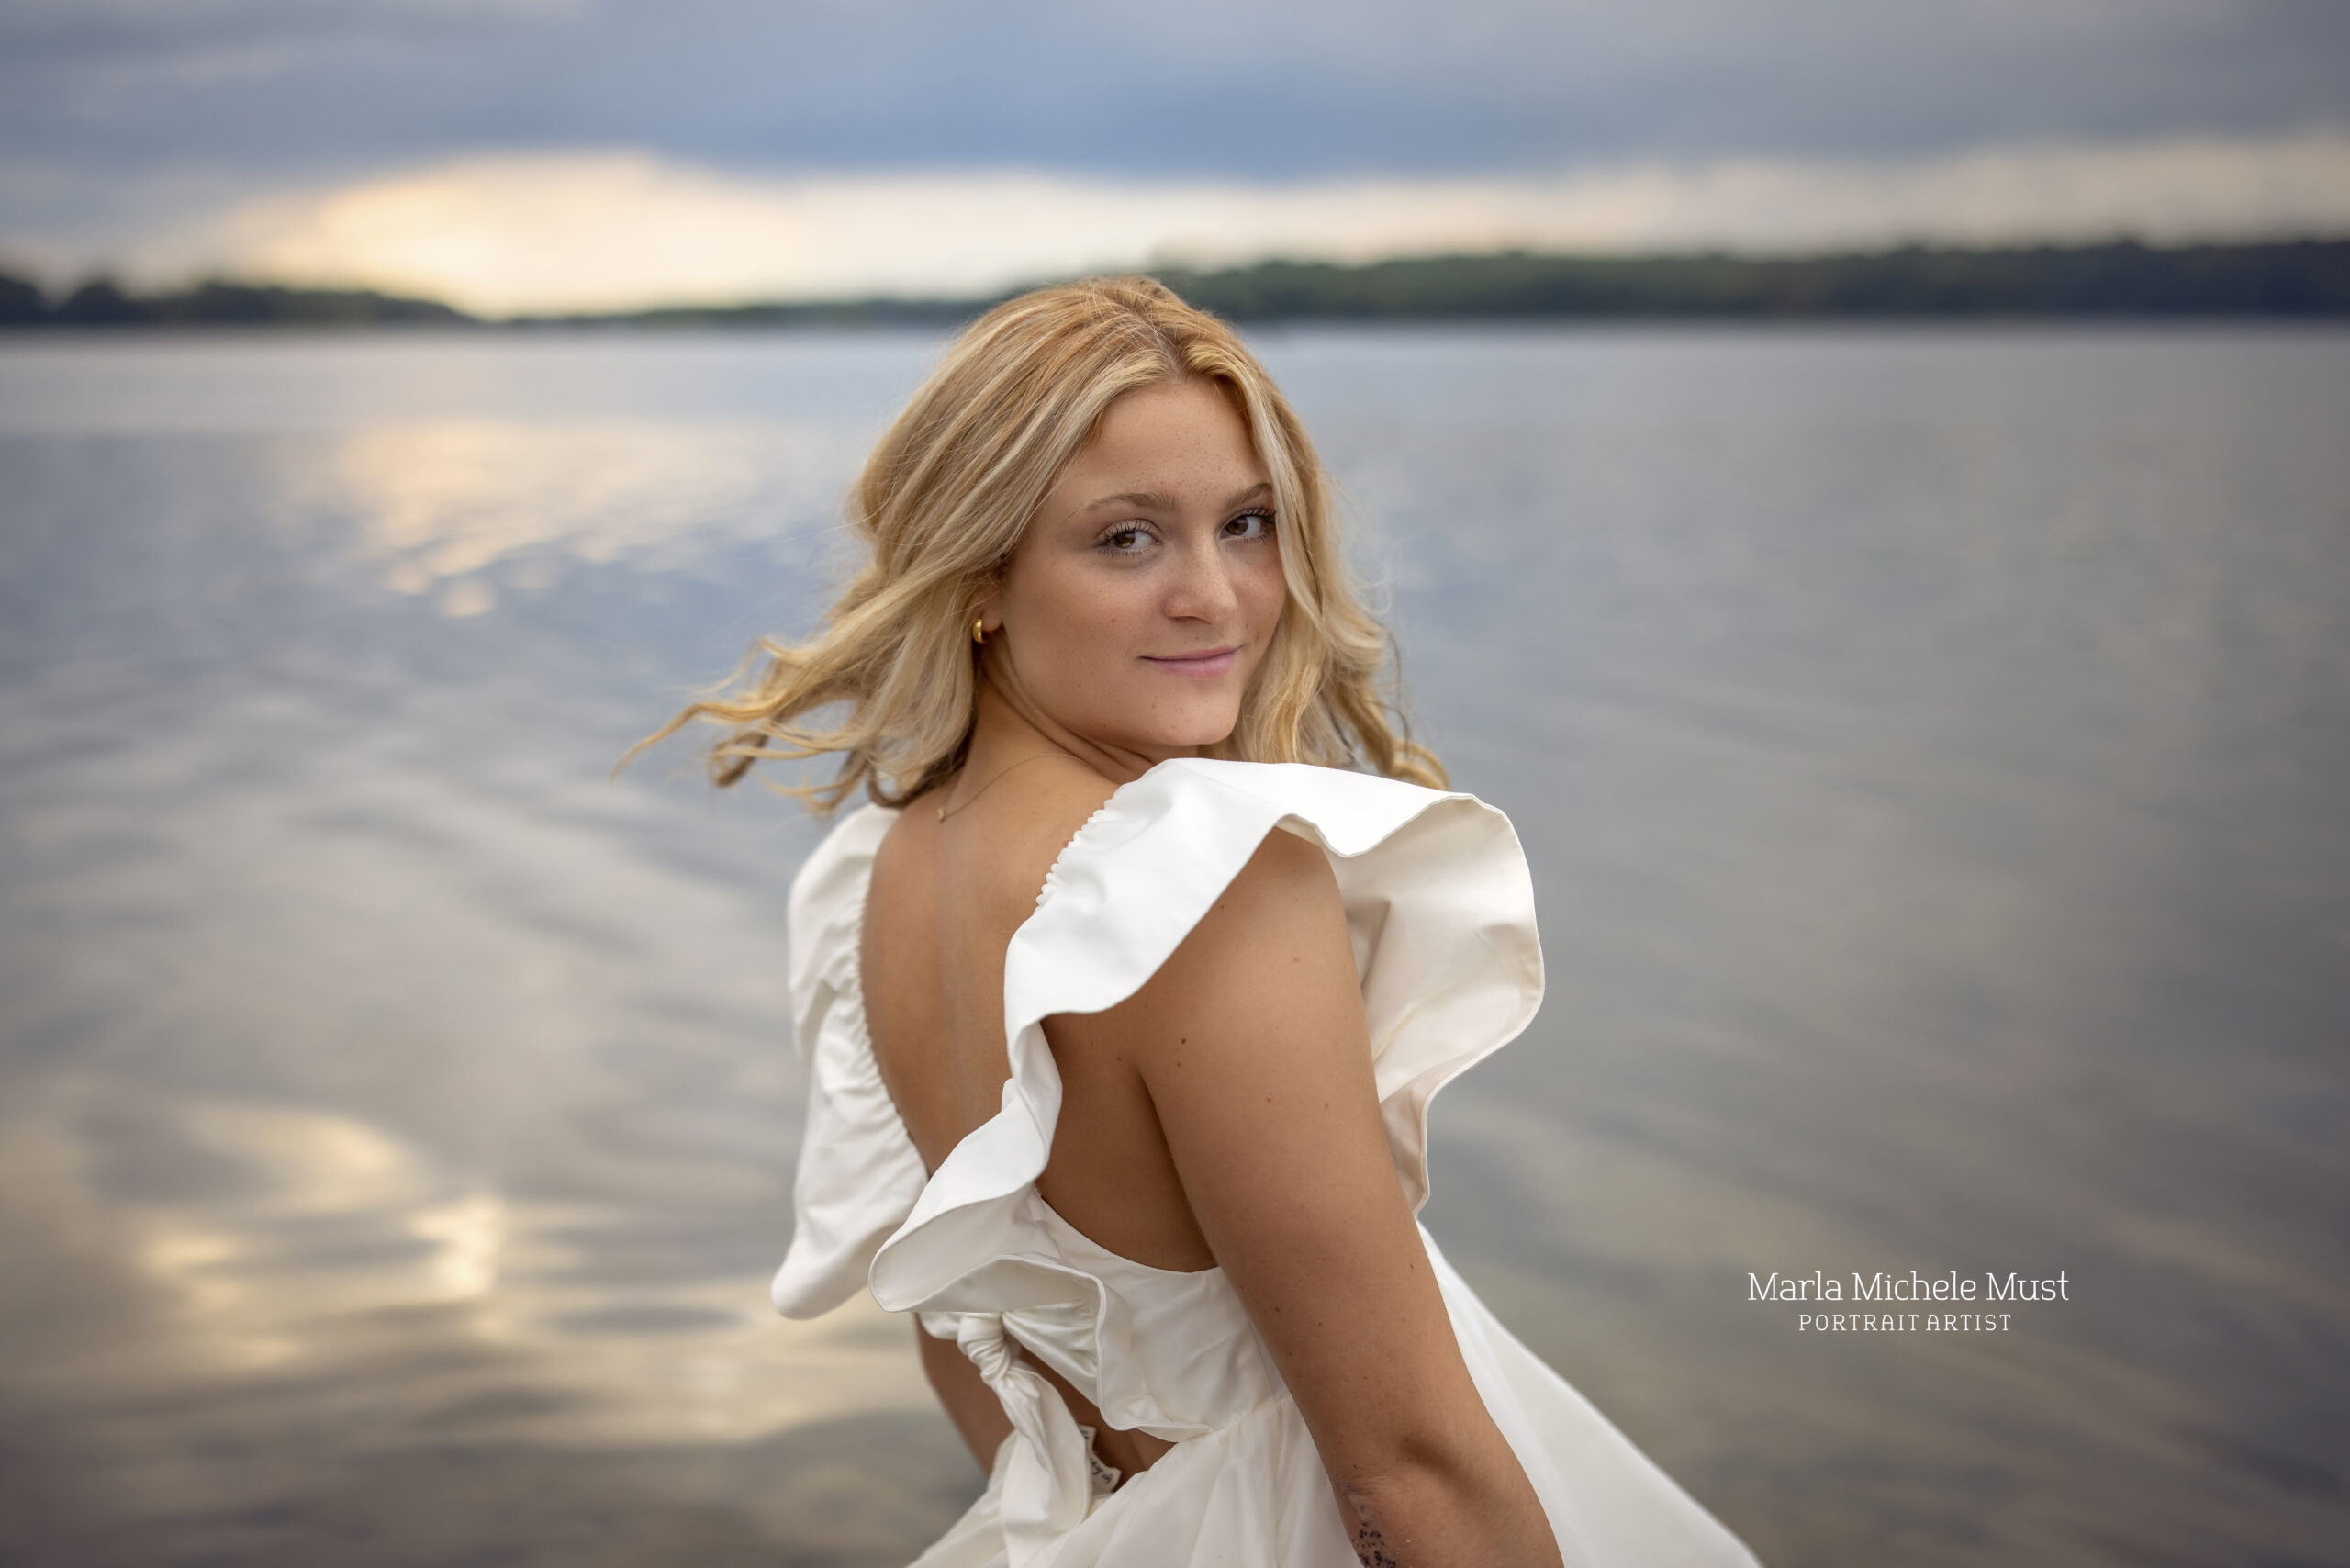 A high school senior stares over her shoulder at the camera in a white flowy dress on the shores of a beach near the Great Lakes in Michigan.